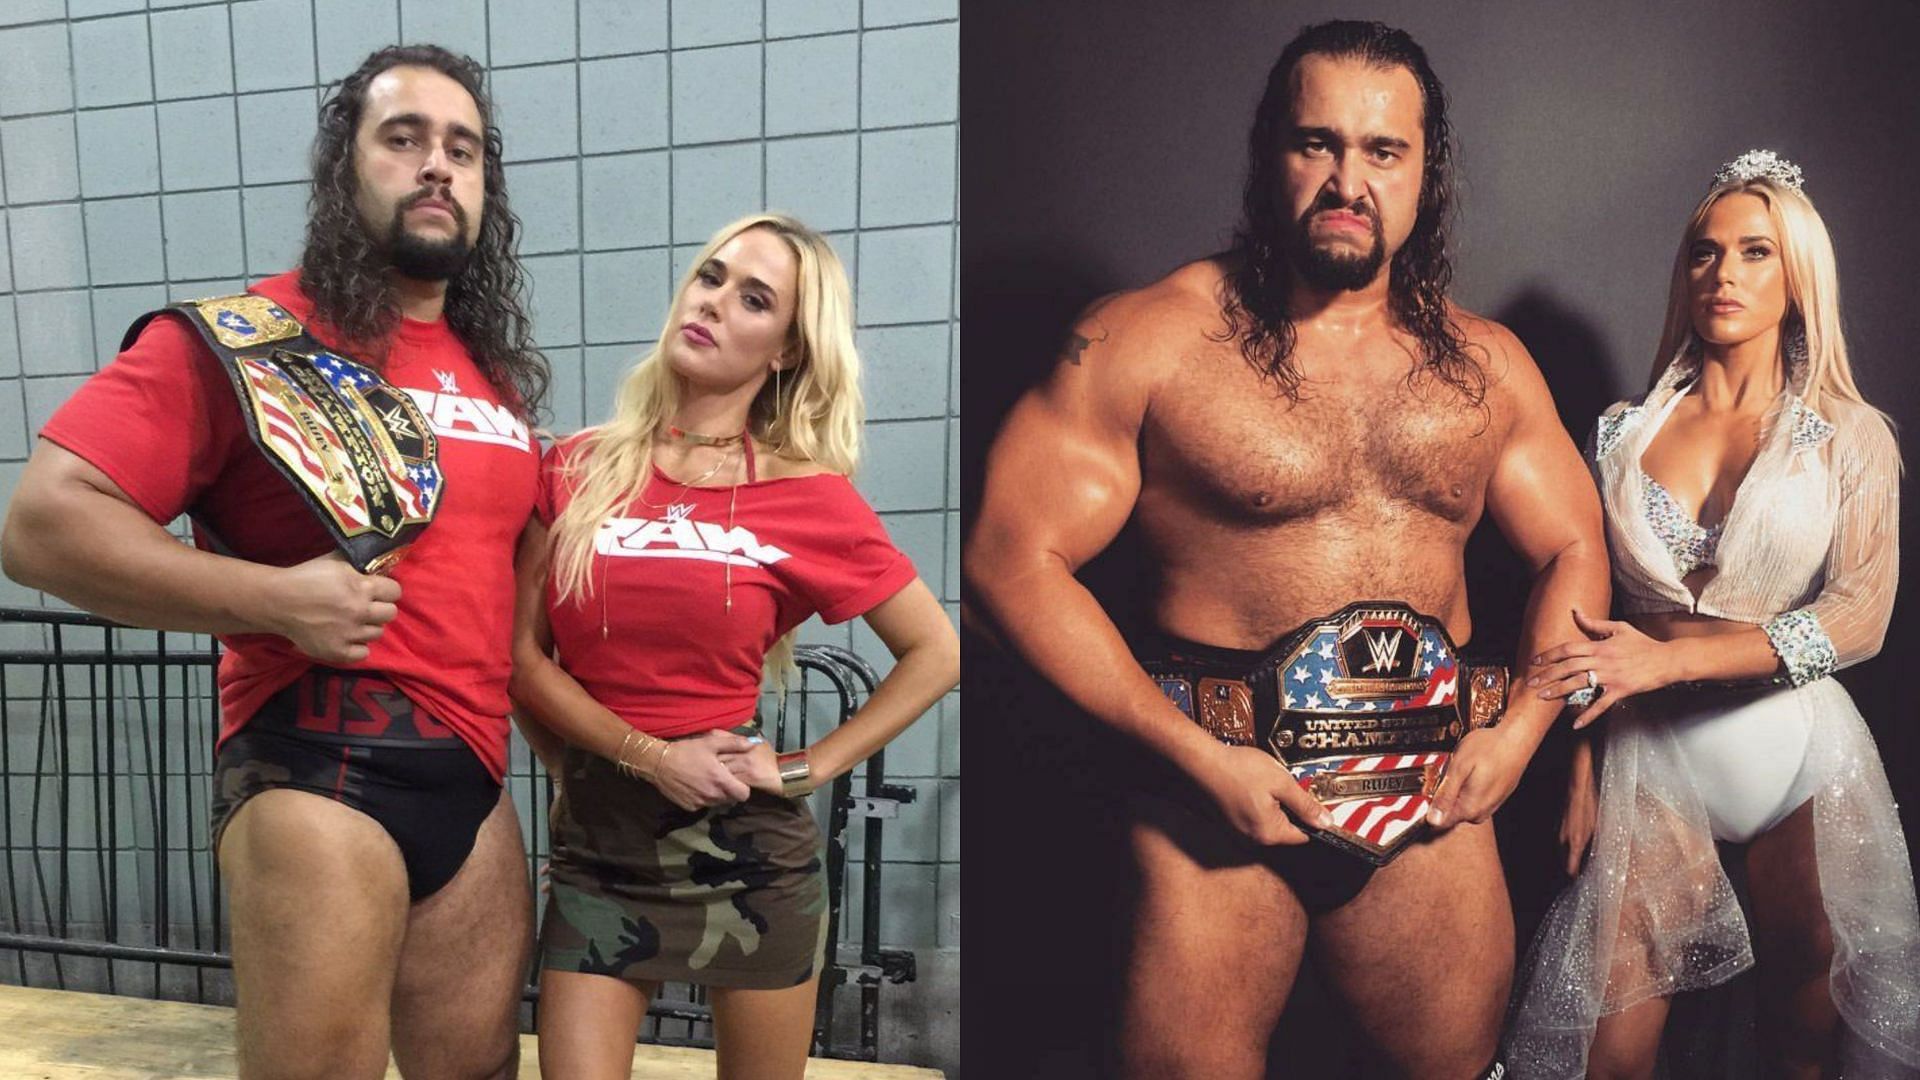 WWE punished Rusev and Lana after they got engaged